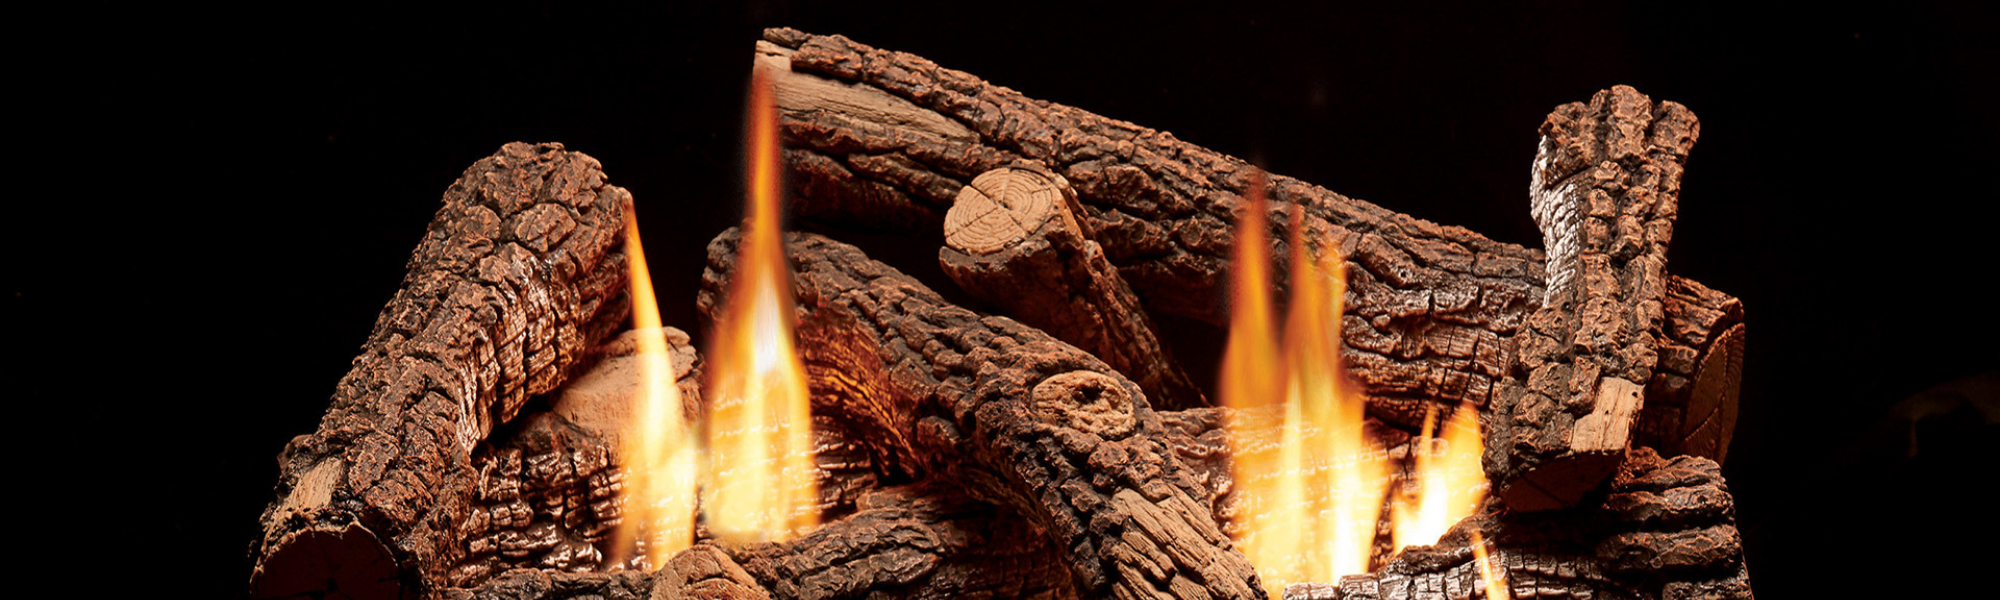 Log set in a electric fireplace